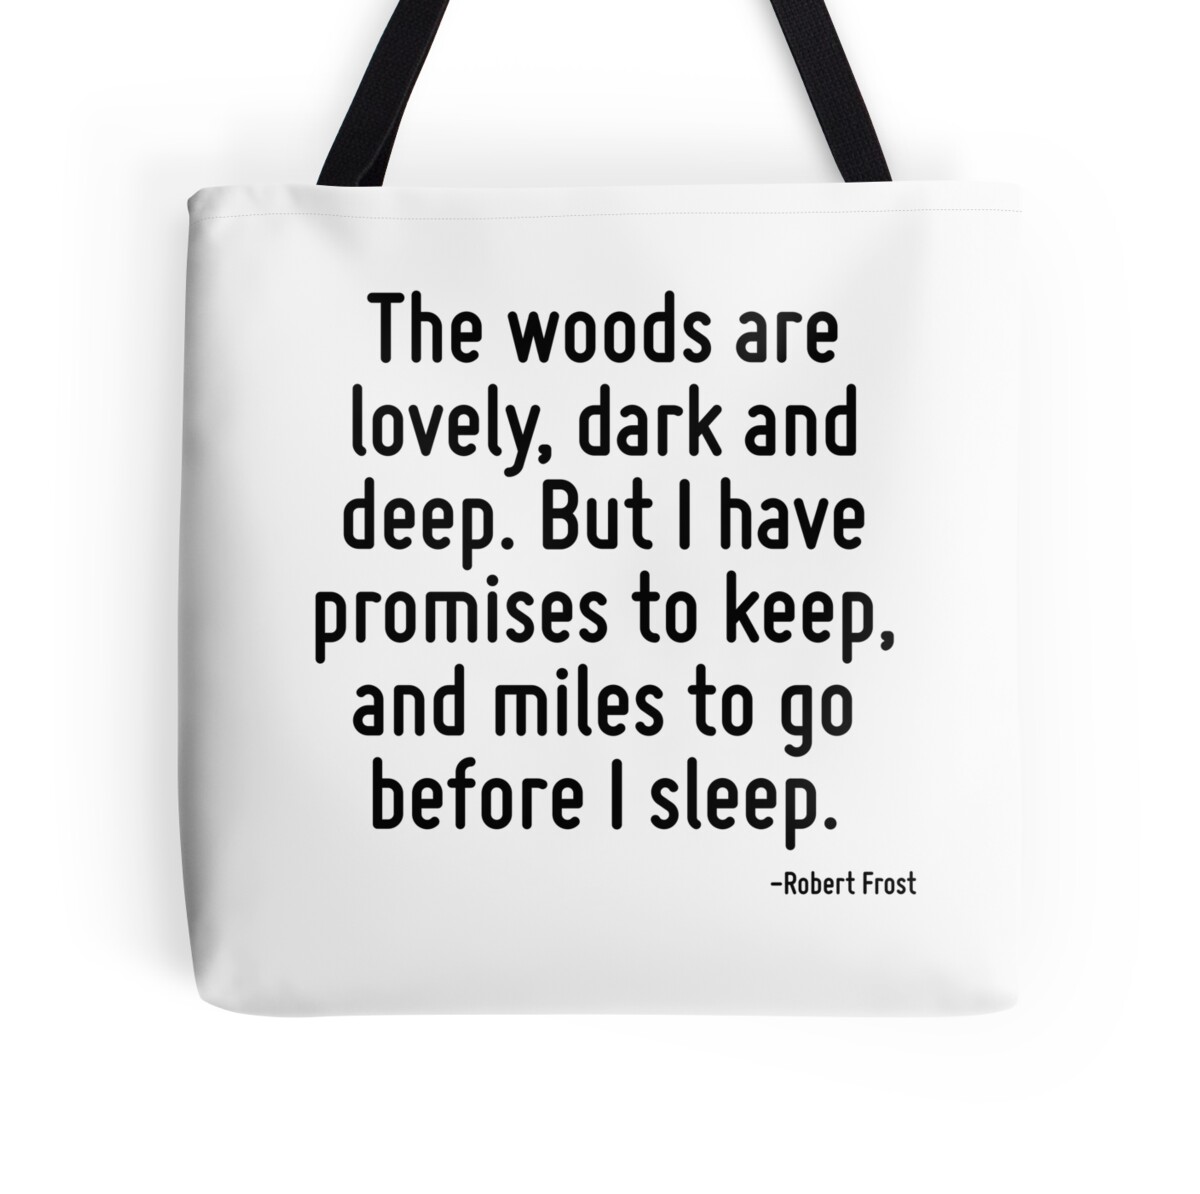 The woods are lovely dark and deep But I have promises to keep